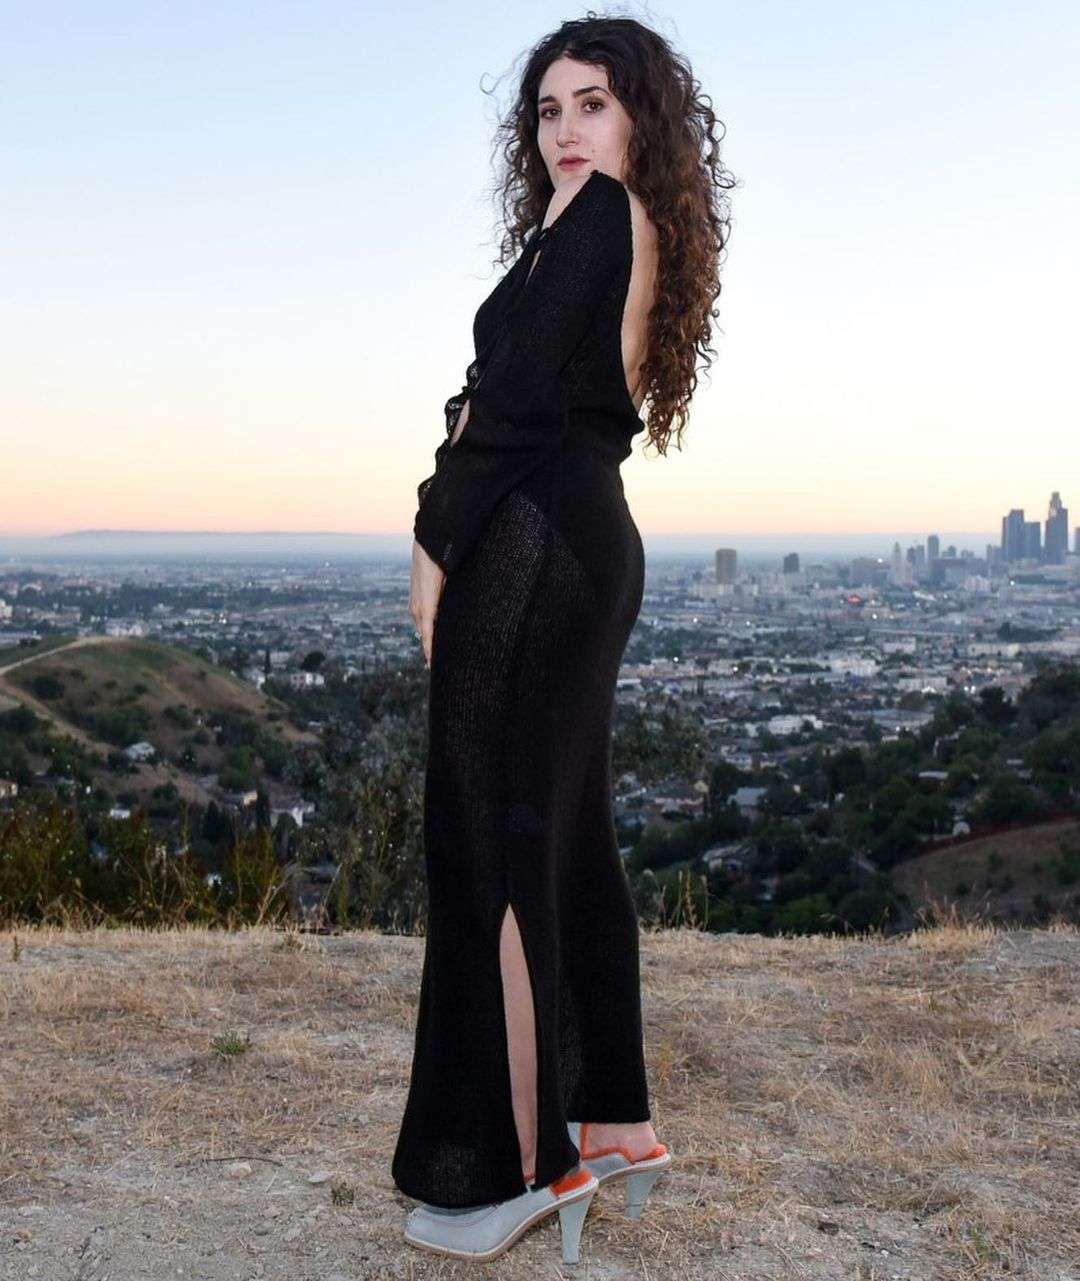 51 Hot Pictures Of Kate Berlant Are Embodiment Of Hotness | Best Of Comic Books